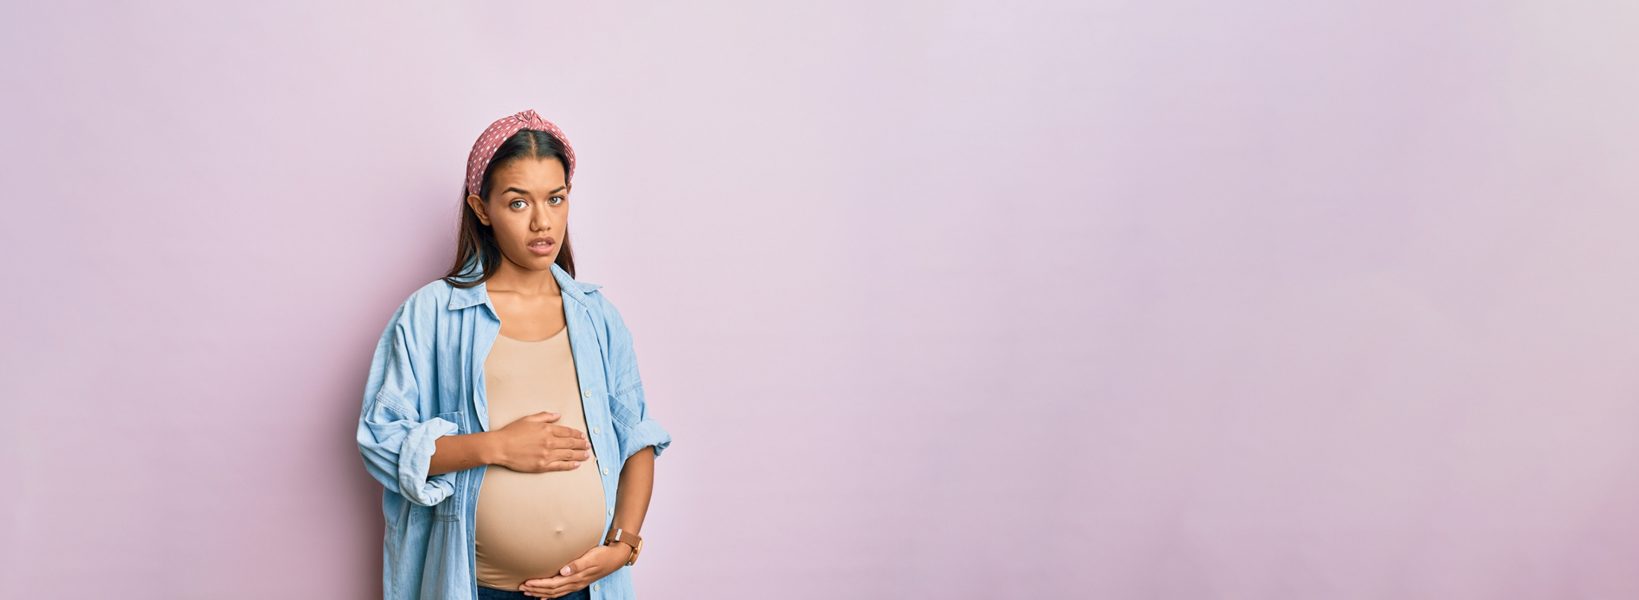 pregnant woman in a tan shirt and chambray jacket in front of a light purple background